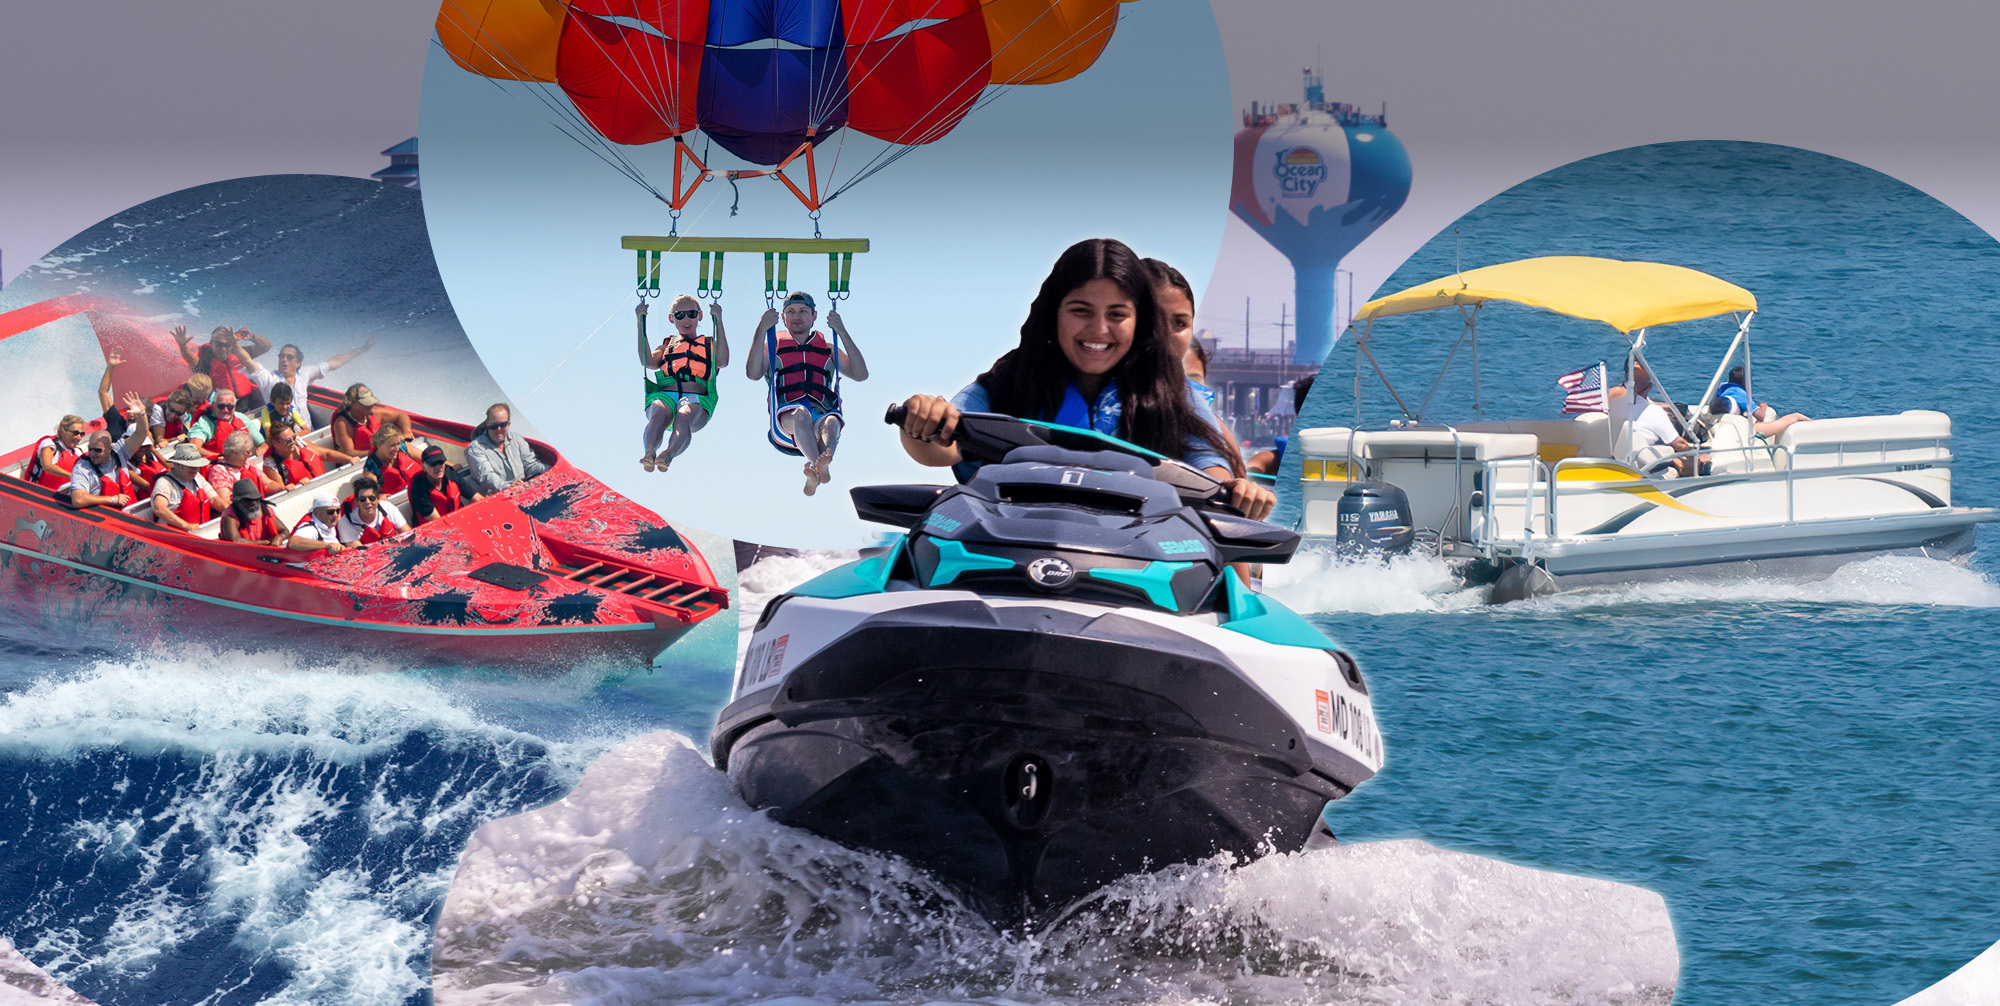 Collage of pontoon boat, speed boat, jet ski, and parasailing